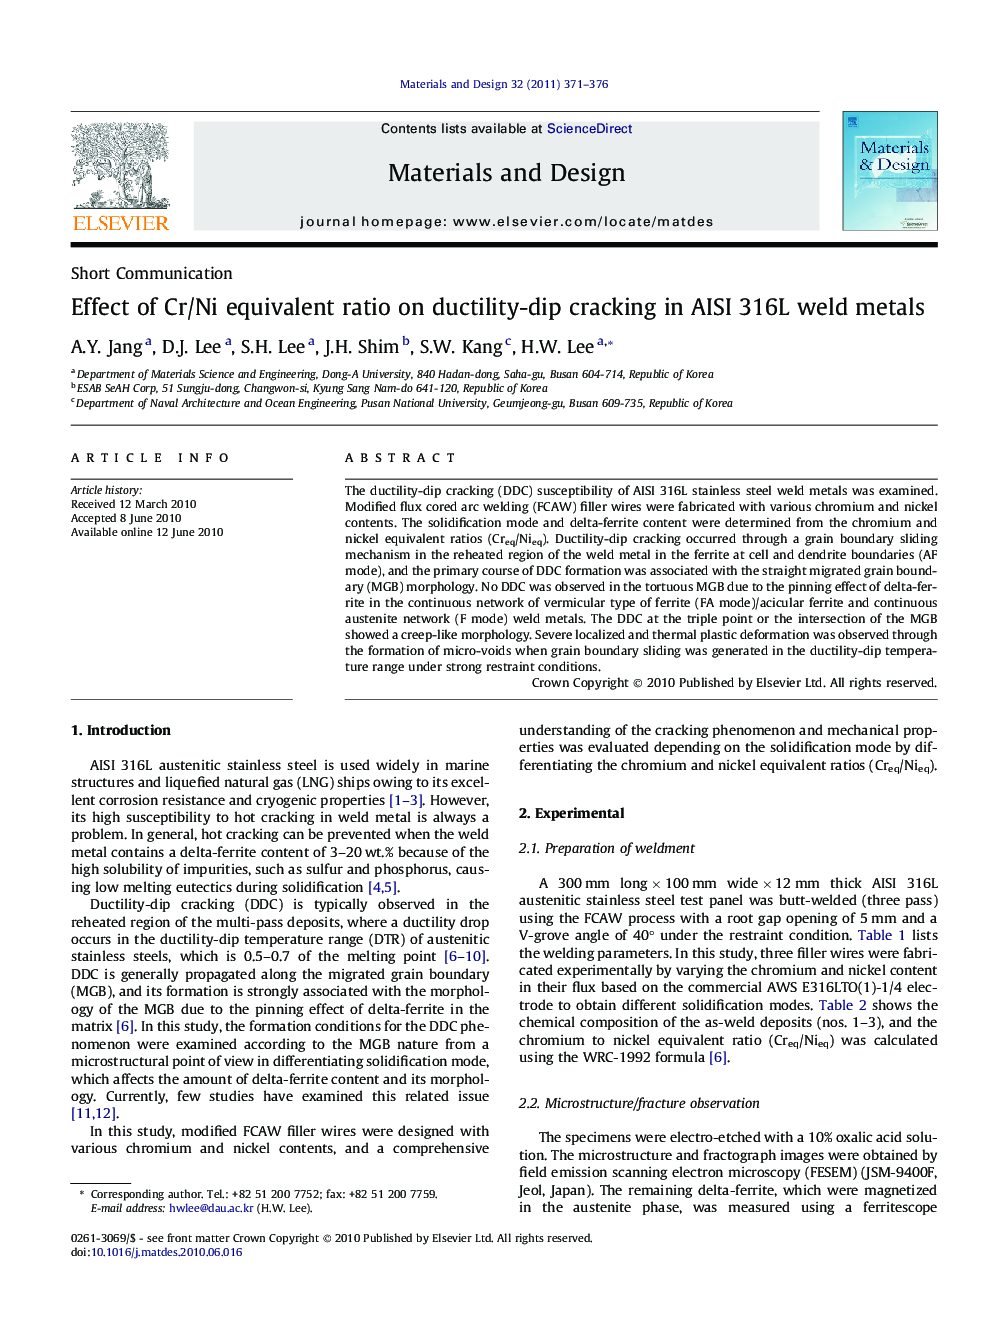 Effect of Cr/Ni equivalent ratio on ductility-dip cracking in AISI 316L weld metals